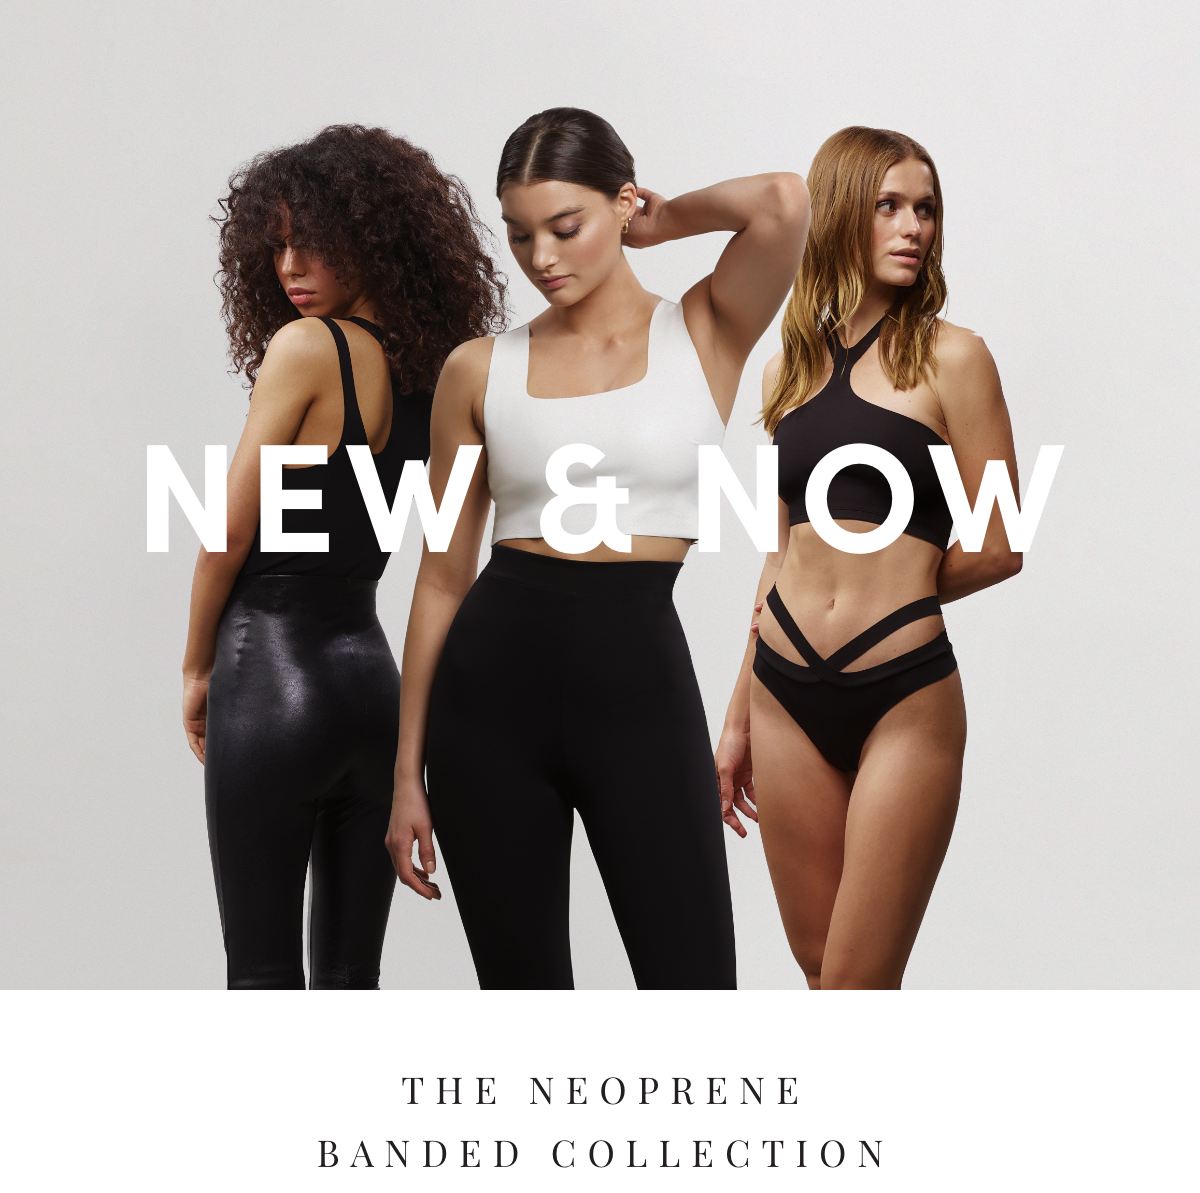 New & Now: The Neoprene Banded Collection